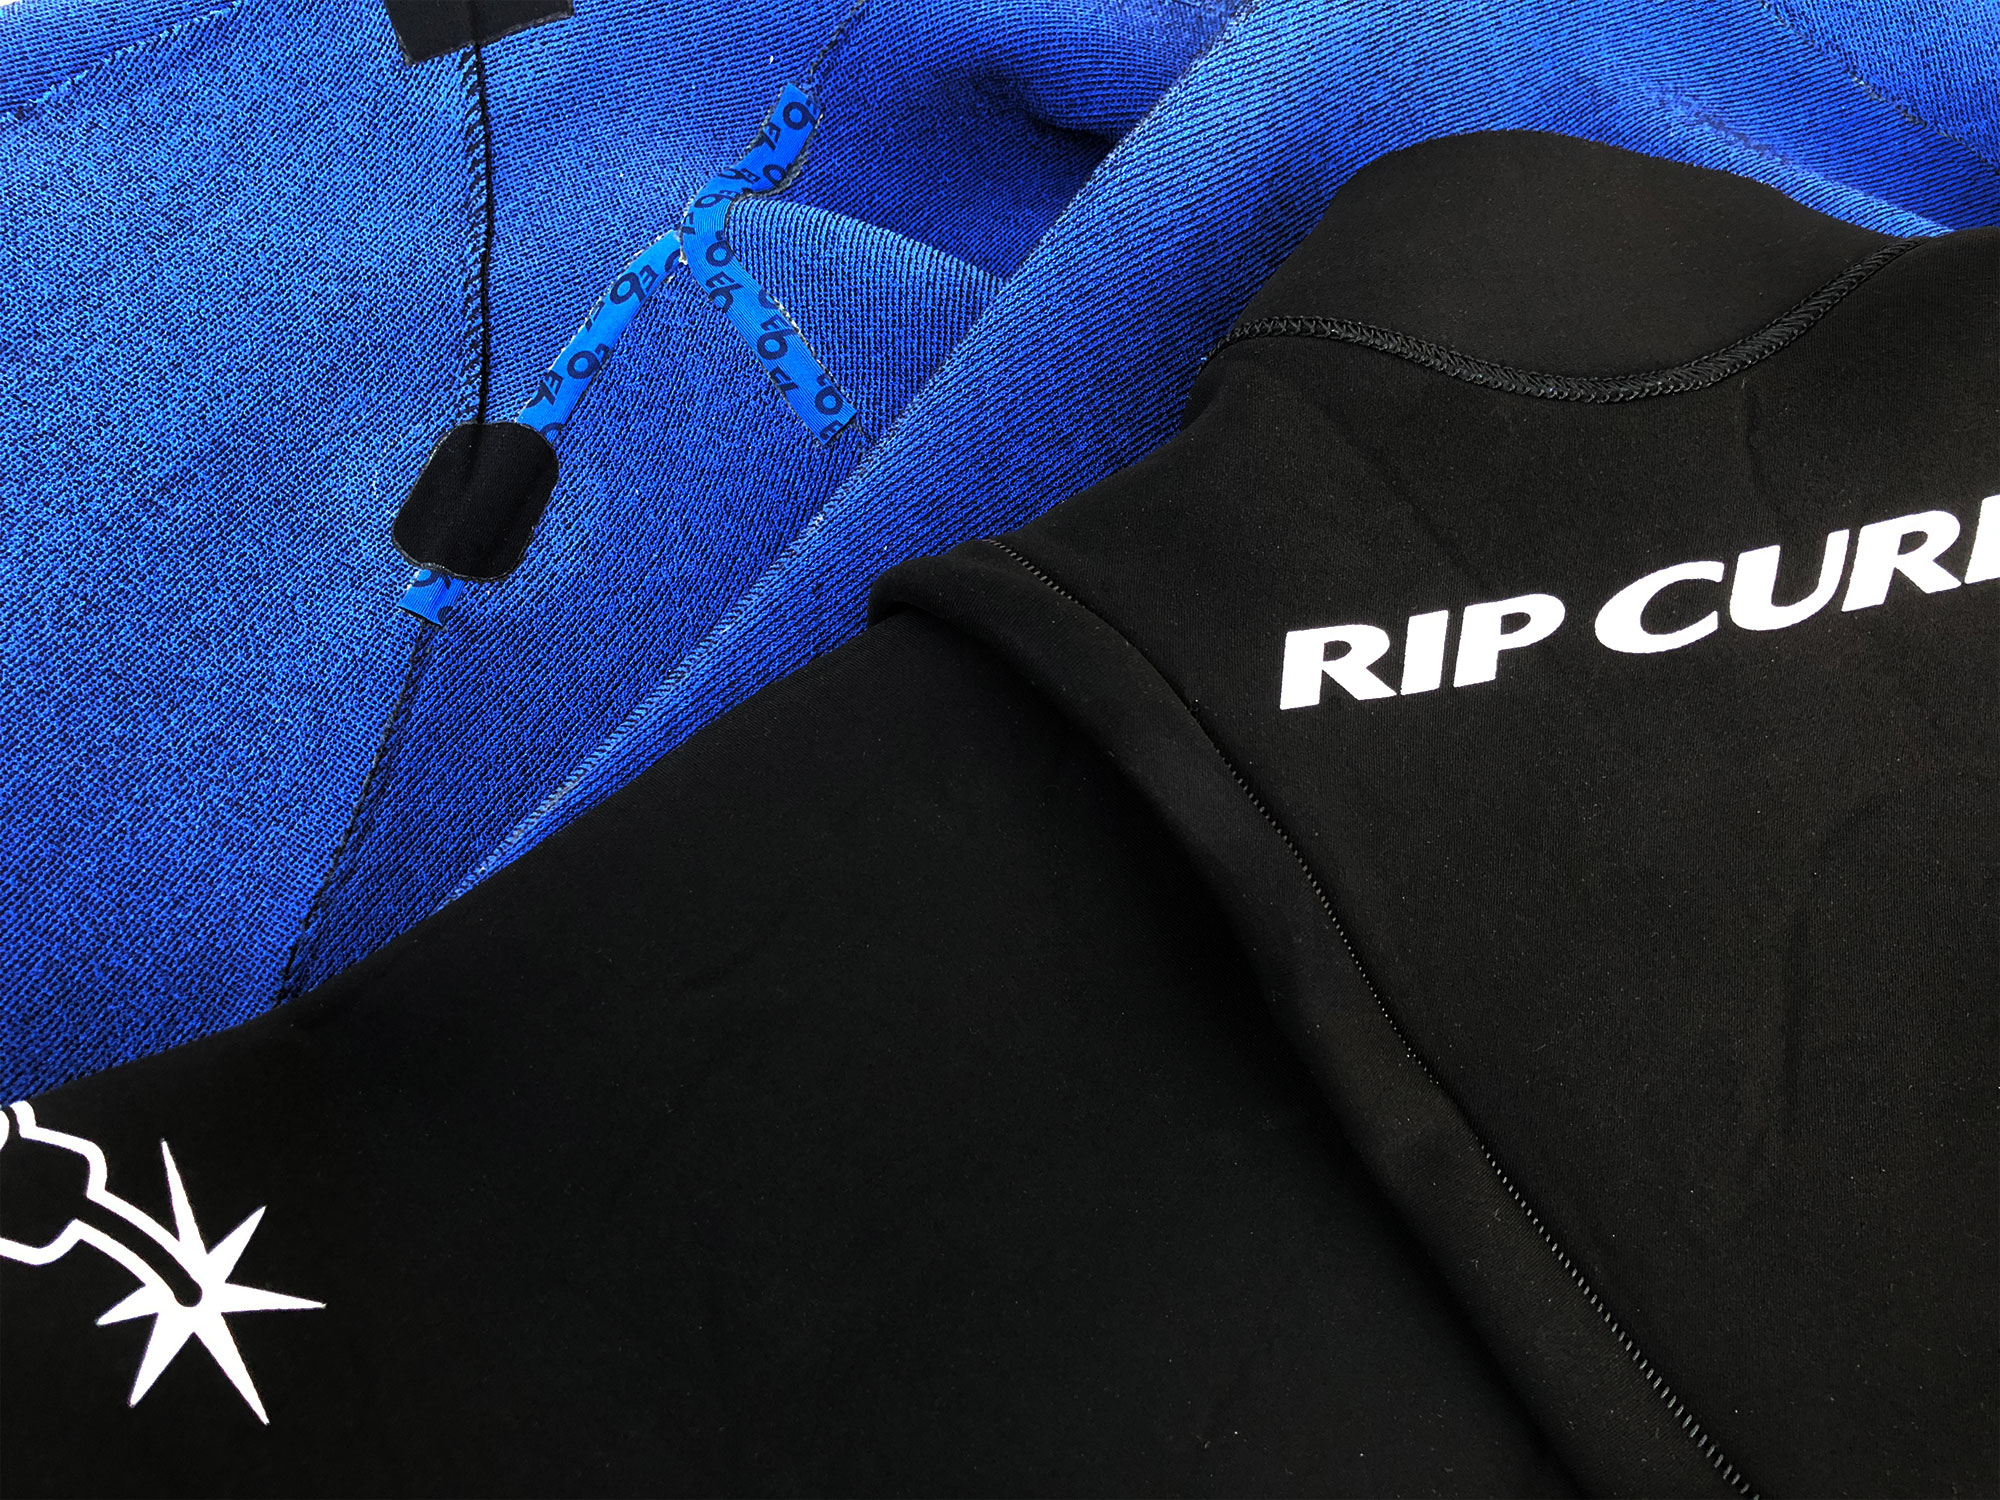 Rip Curl Wetsuit Review